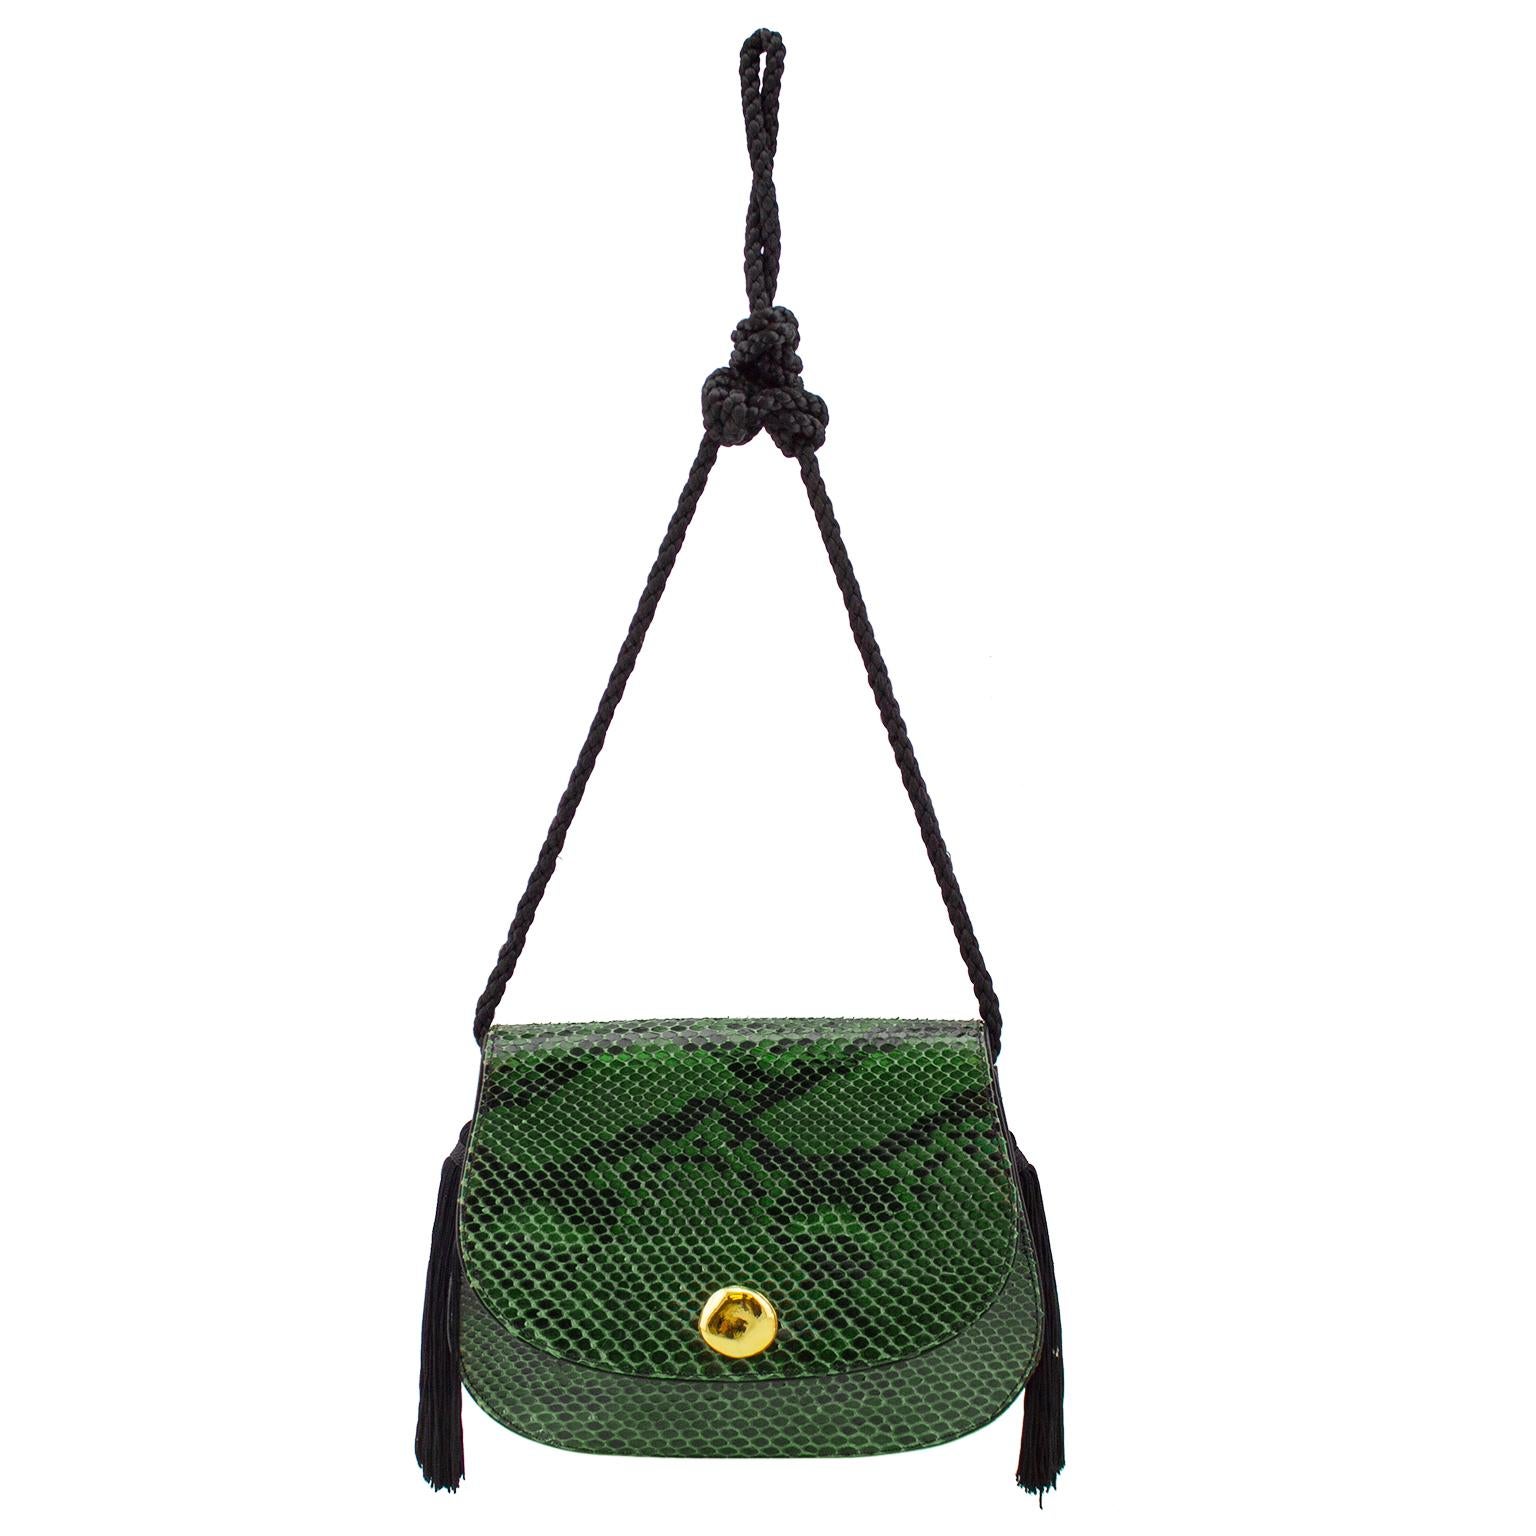 1980s Emanuel Ungaro evening/dinner bag. Gorgeous green and black patterned leather with contrasting gold tone hardware. Flap front with snap closure. Black twisted ribbon shoulder strap, knotted to adjust to desired length, but can be styled to